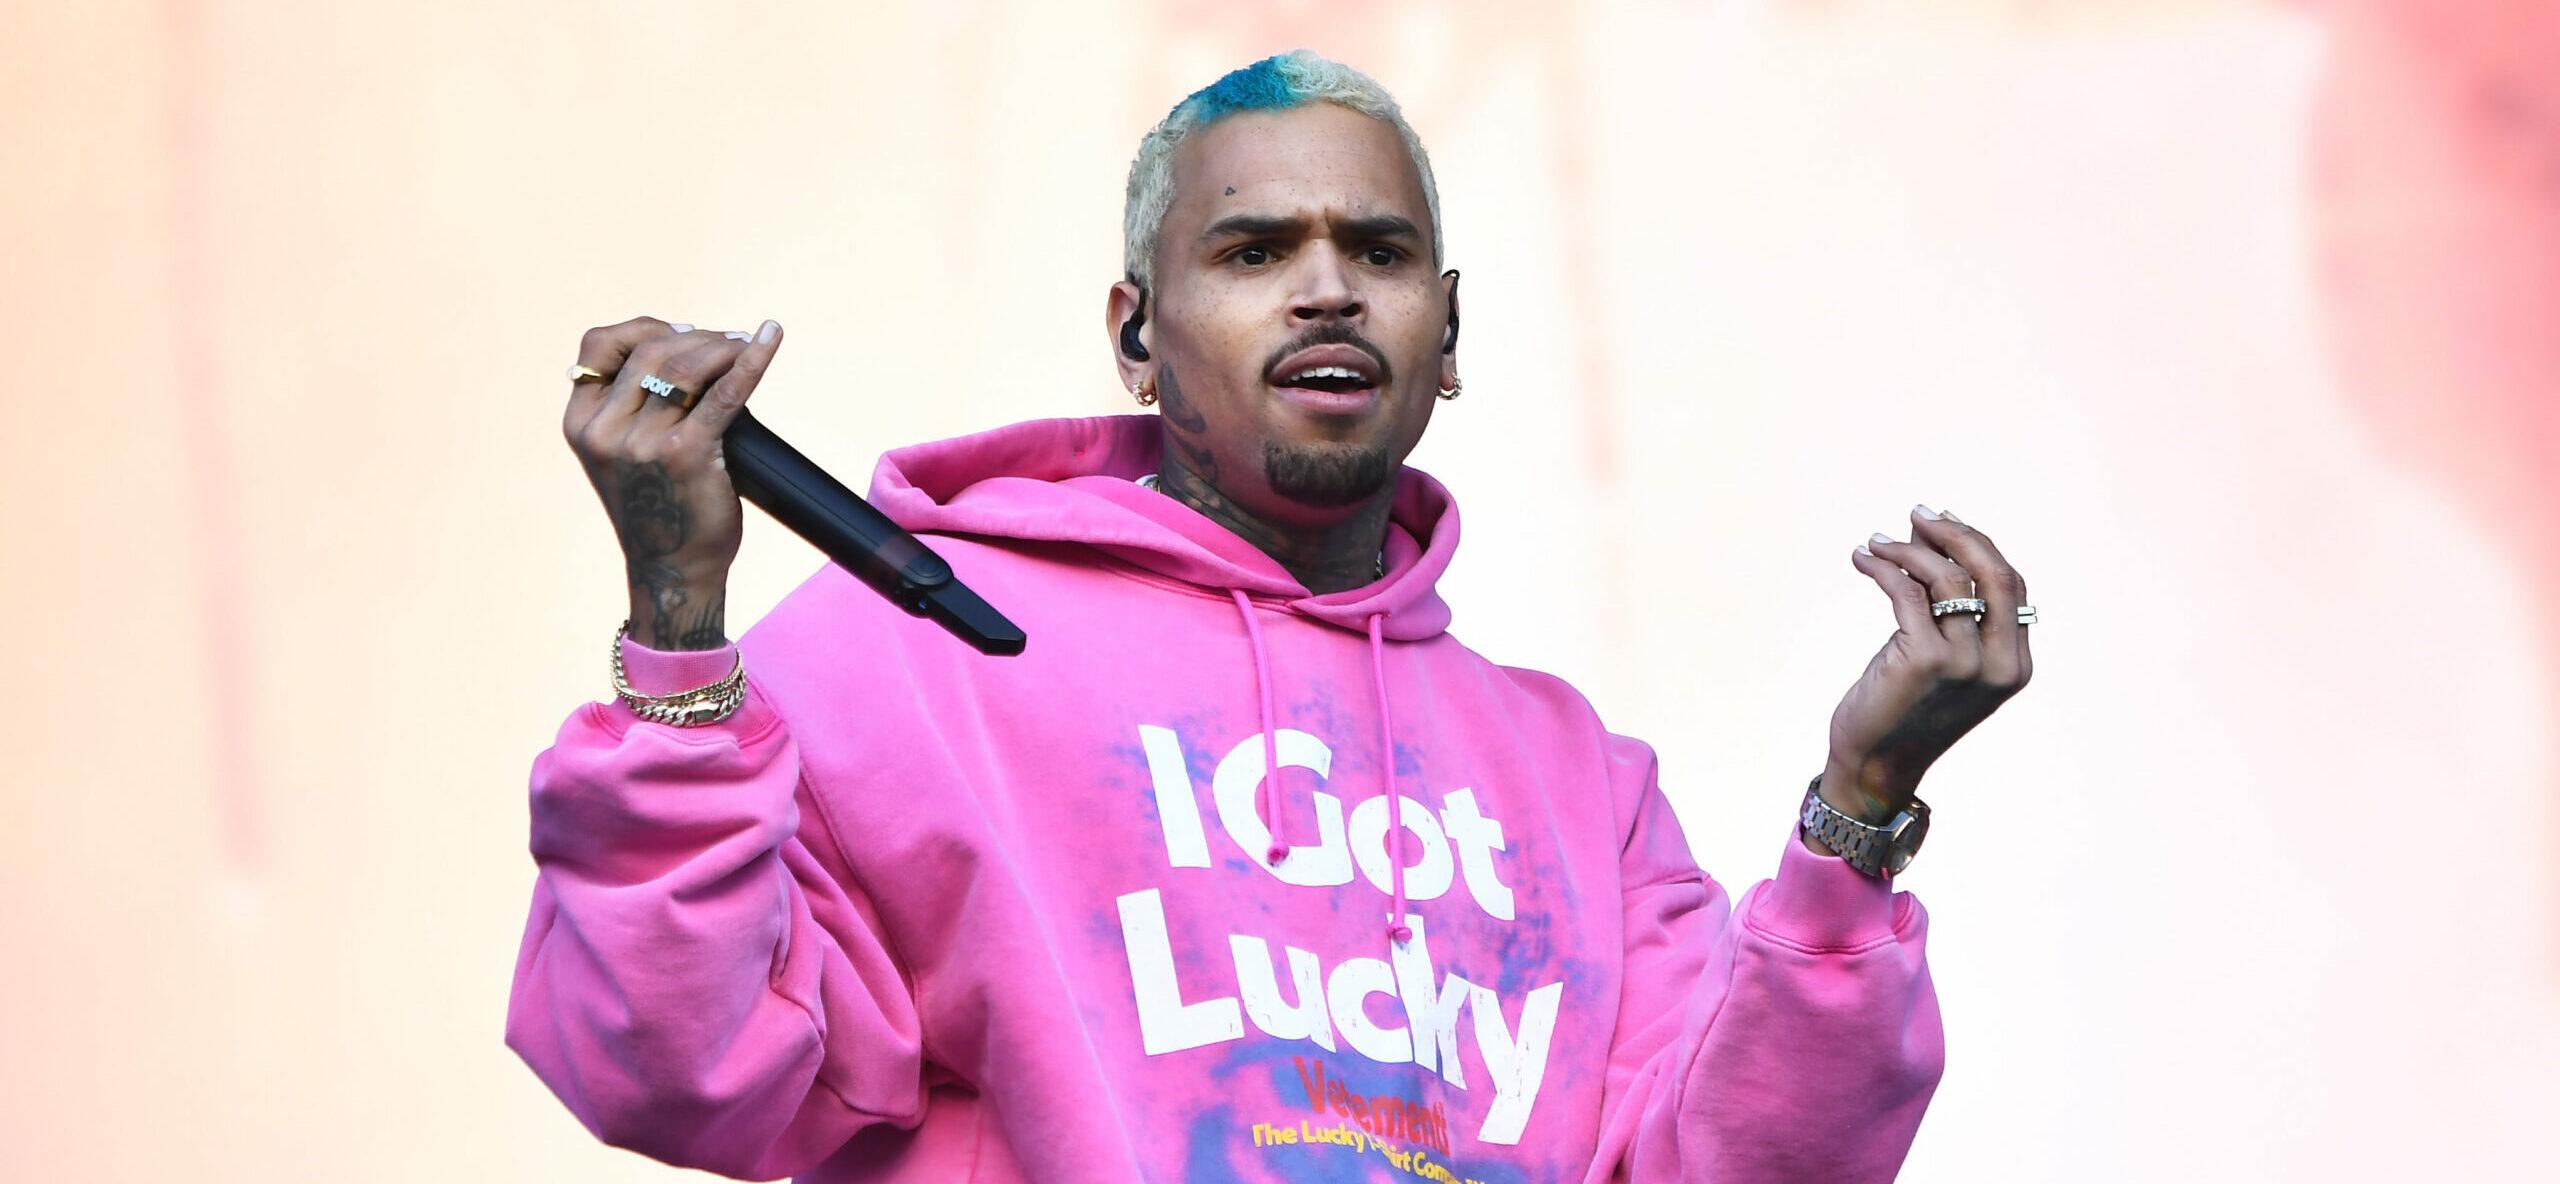 Designer Gear In Chris Brown’s ‘Department Store’ Could Cover His $4 Million In Back Taxes